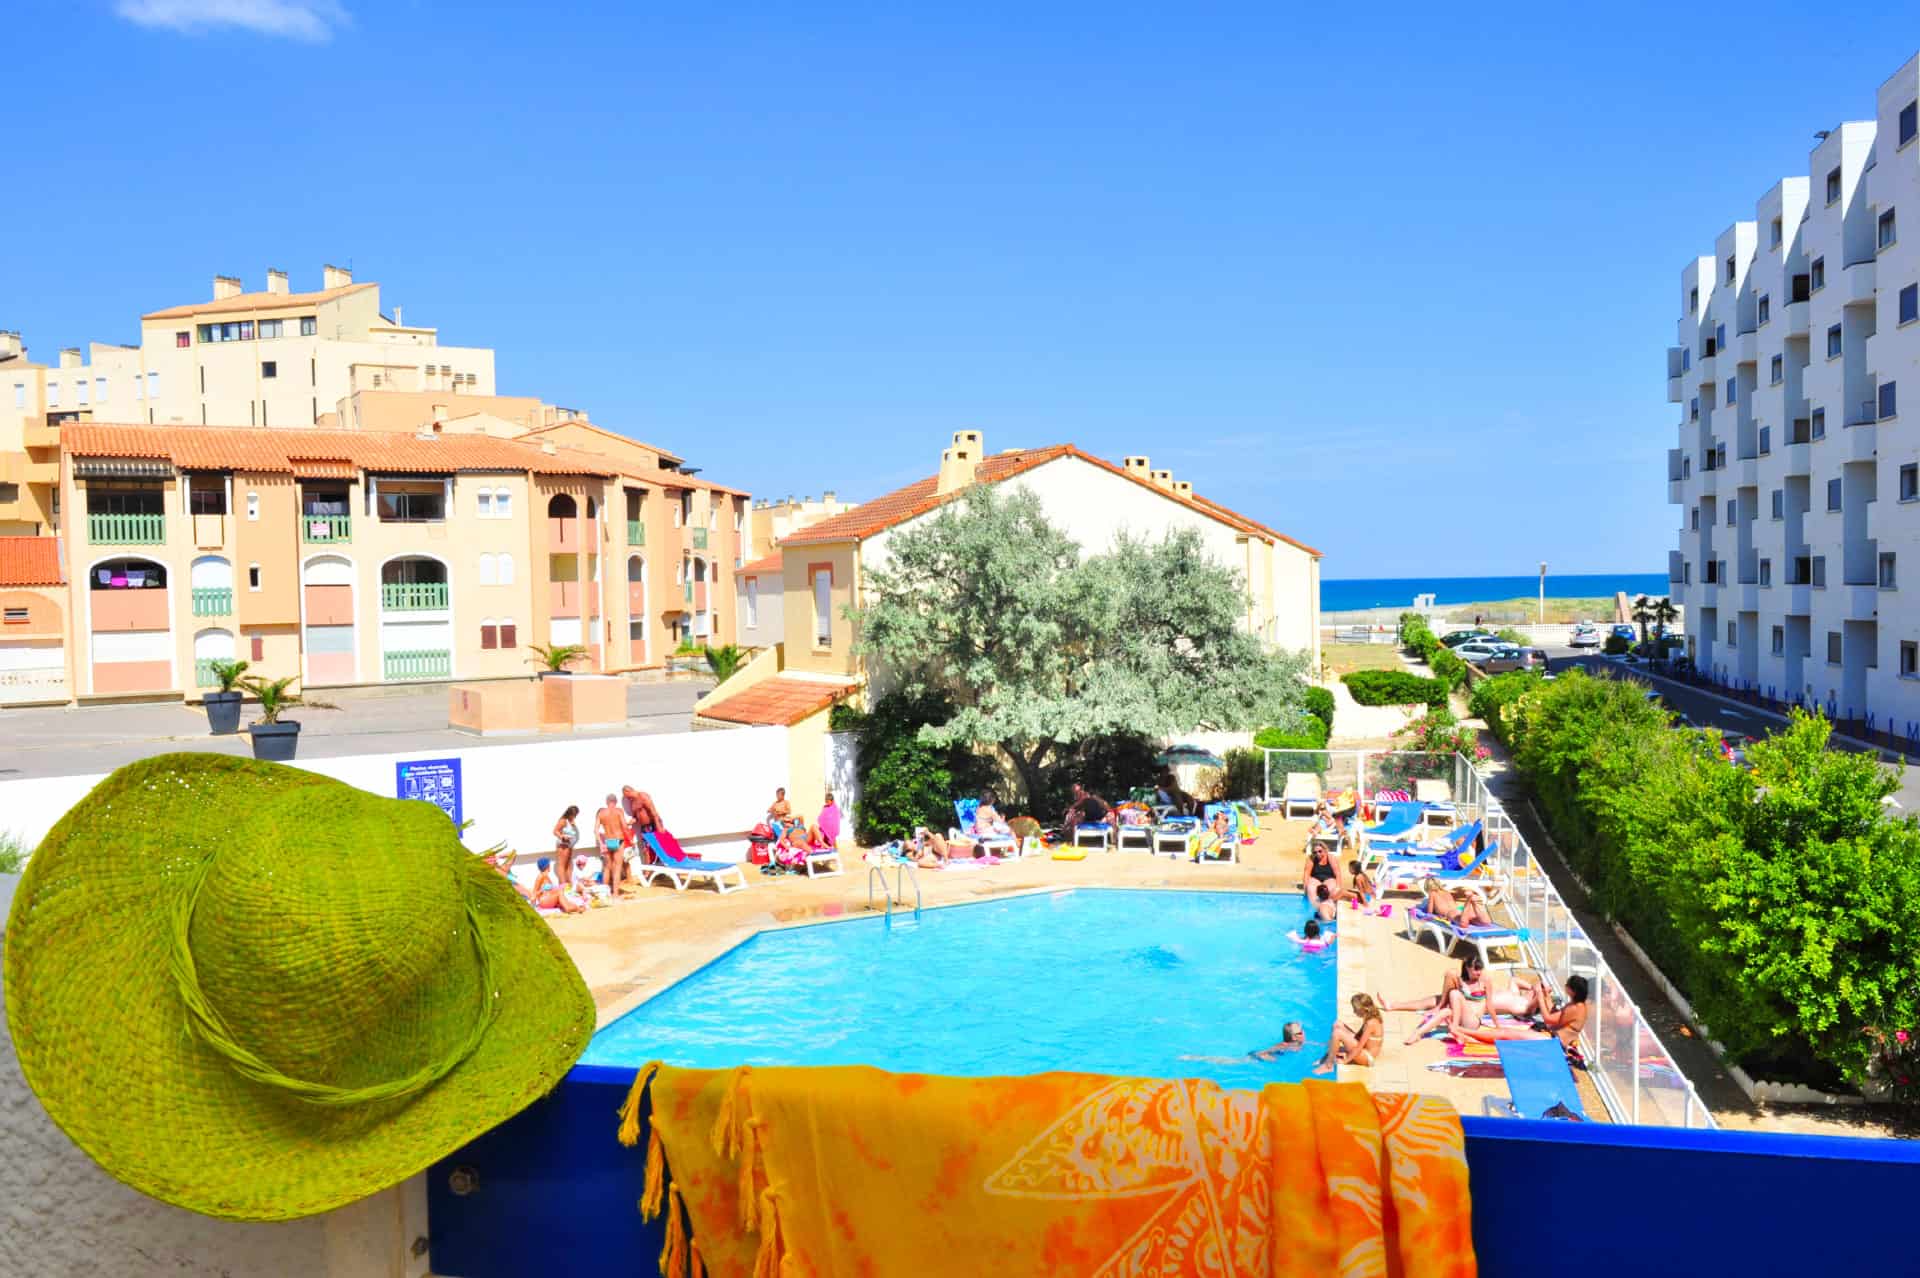 Example of a view of the outdoor swimming pool and the sea at Le Grand Bleu holiday residence in Port-Barcarès, Occitania